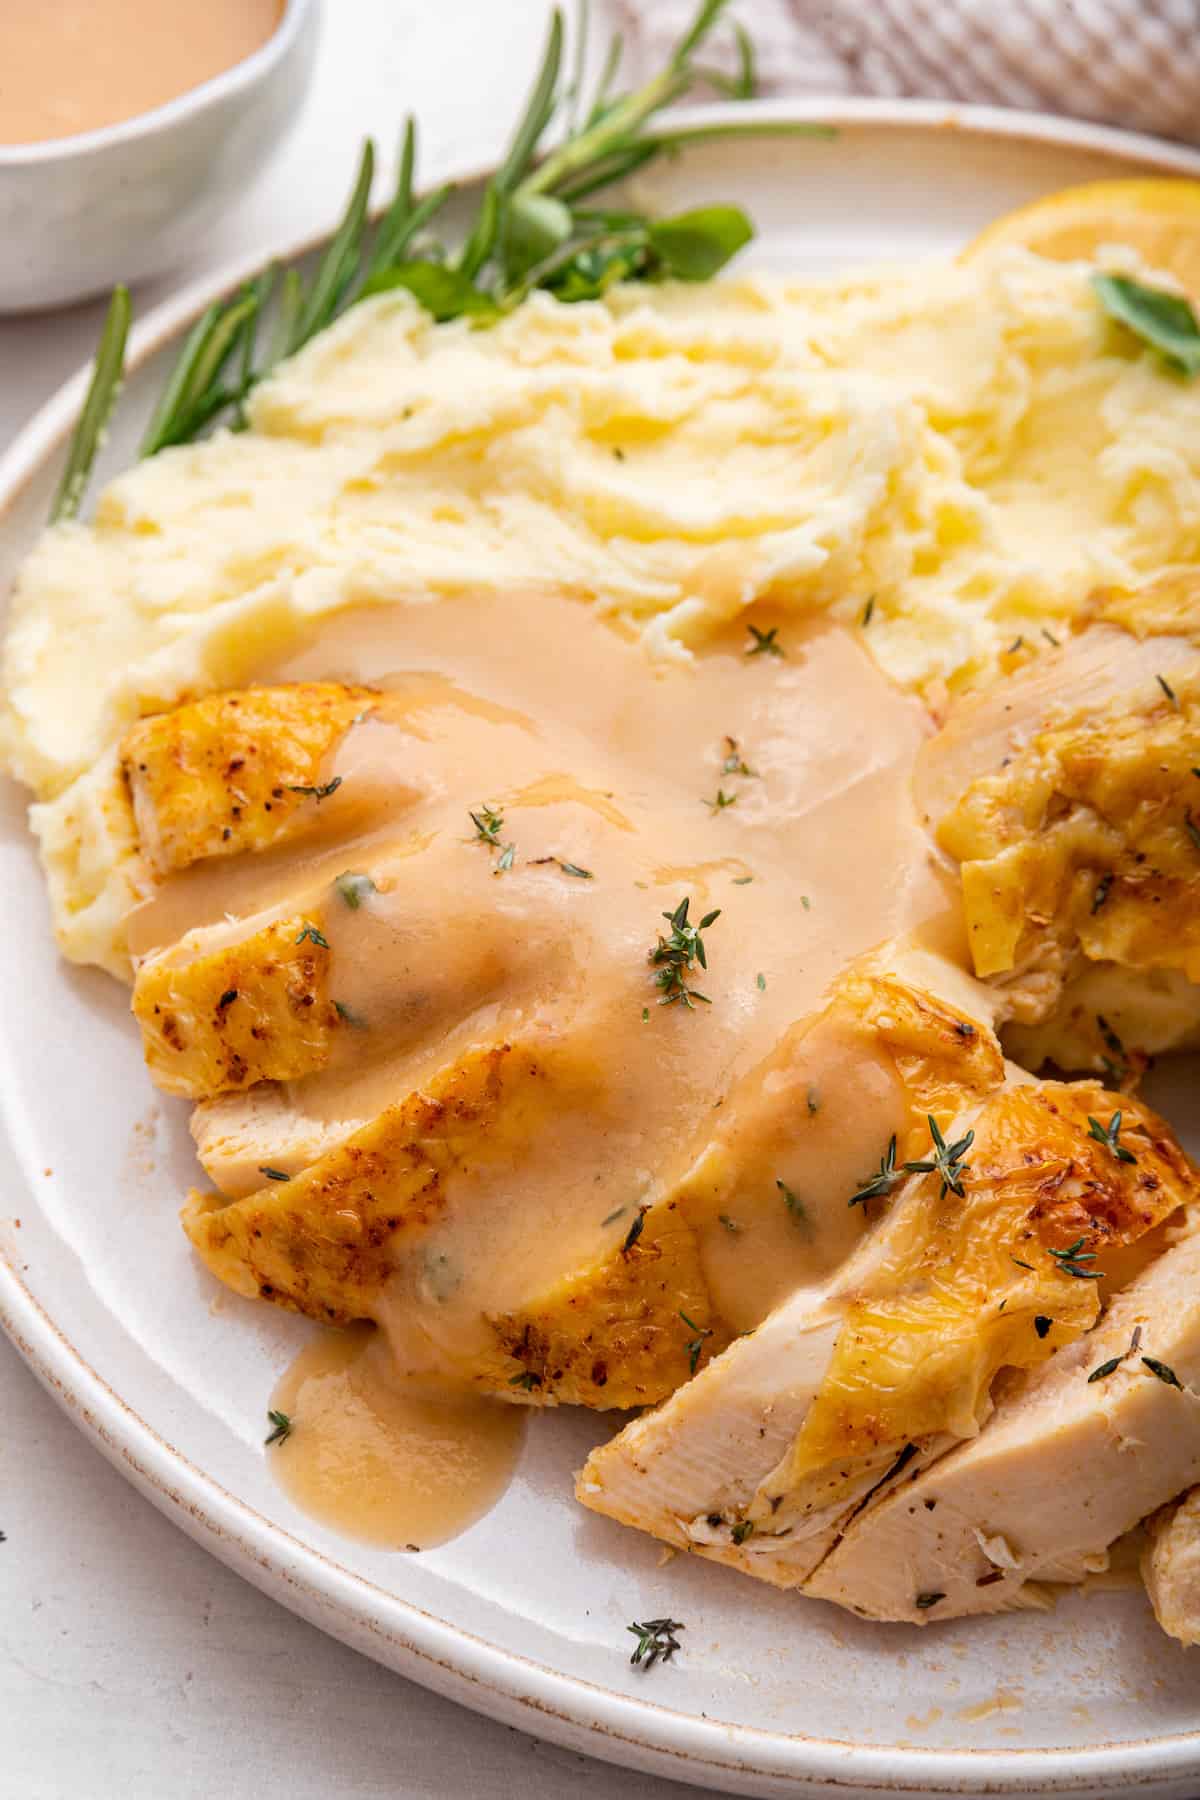 Sliced Instant Pot whole chicken on plate with mashed potatoes and gravy